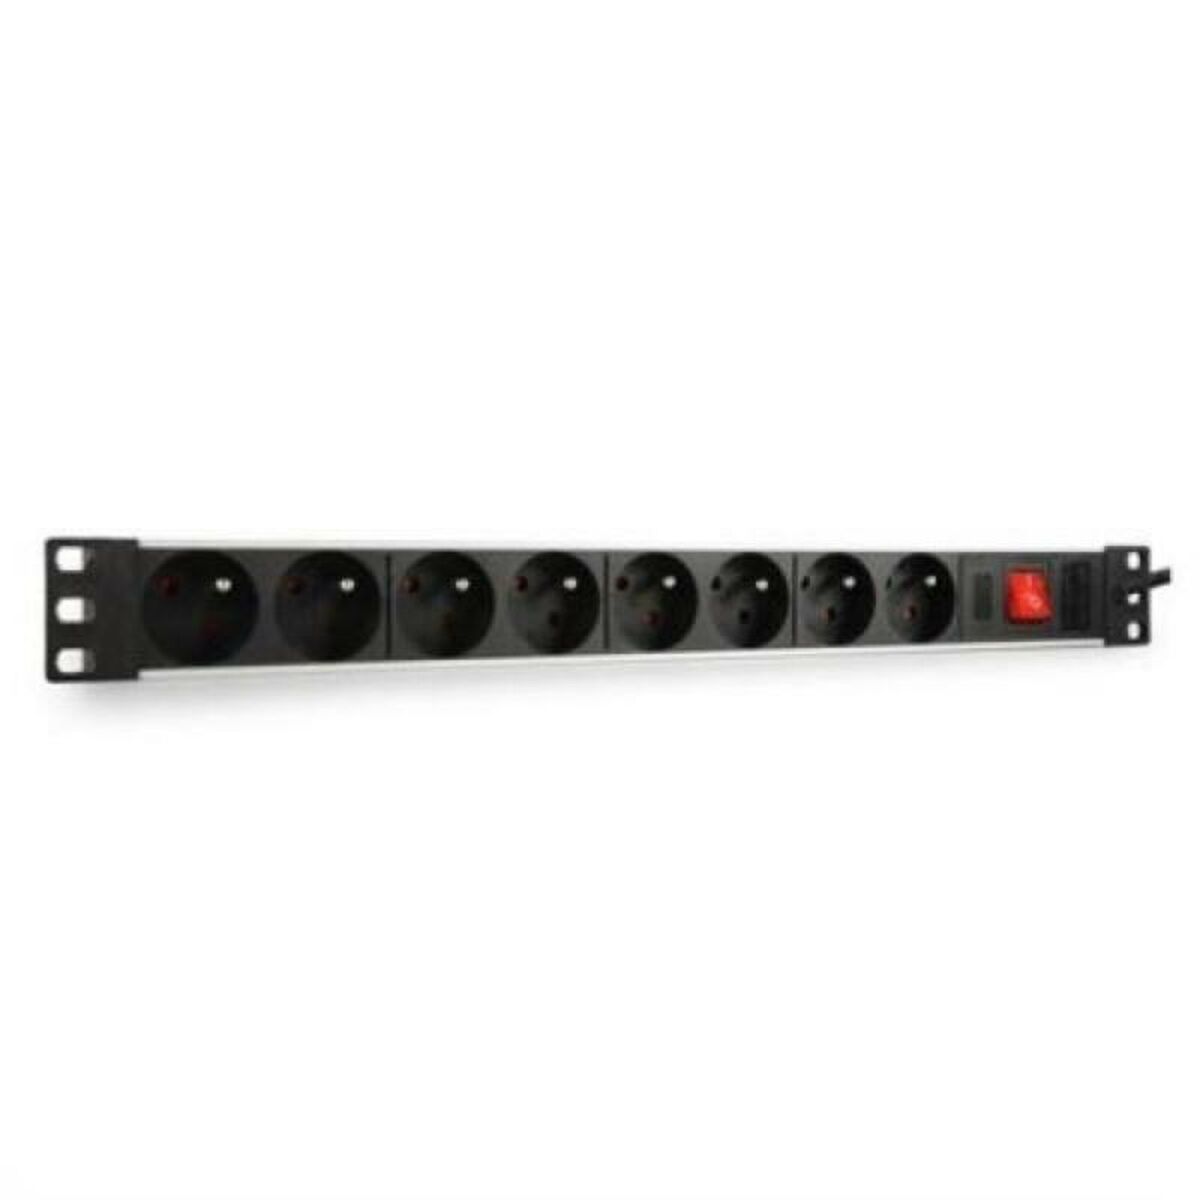 Schuko 19" 8 Way Multi-socket Adapter WP WPN-PDU-G01-08, WP, Computing, Accessories, schuko-19-8-way-multi-socket-adapter-wp-wpn-pdu-g01-08, Brand_WP, category-reference-2609, category-reference-2803, category-reference-2828, category-reference-t-19685, category-reference-t-19908, Condition_NEW, furniture, networks/wiring, organisation, Price_20 - 50, Teleworking, RiotNook